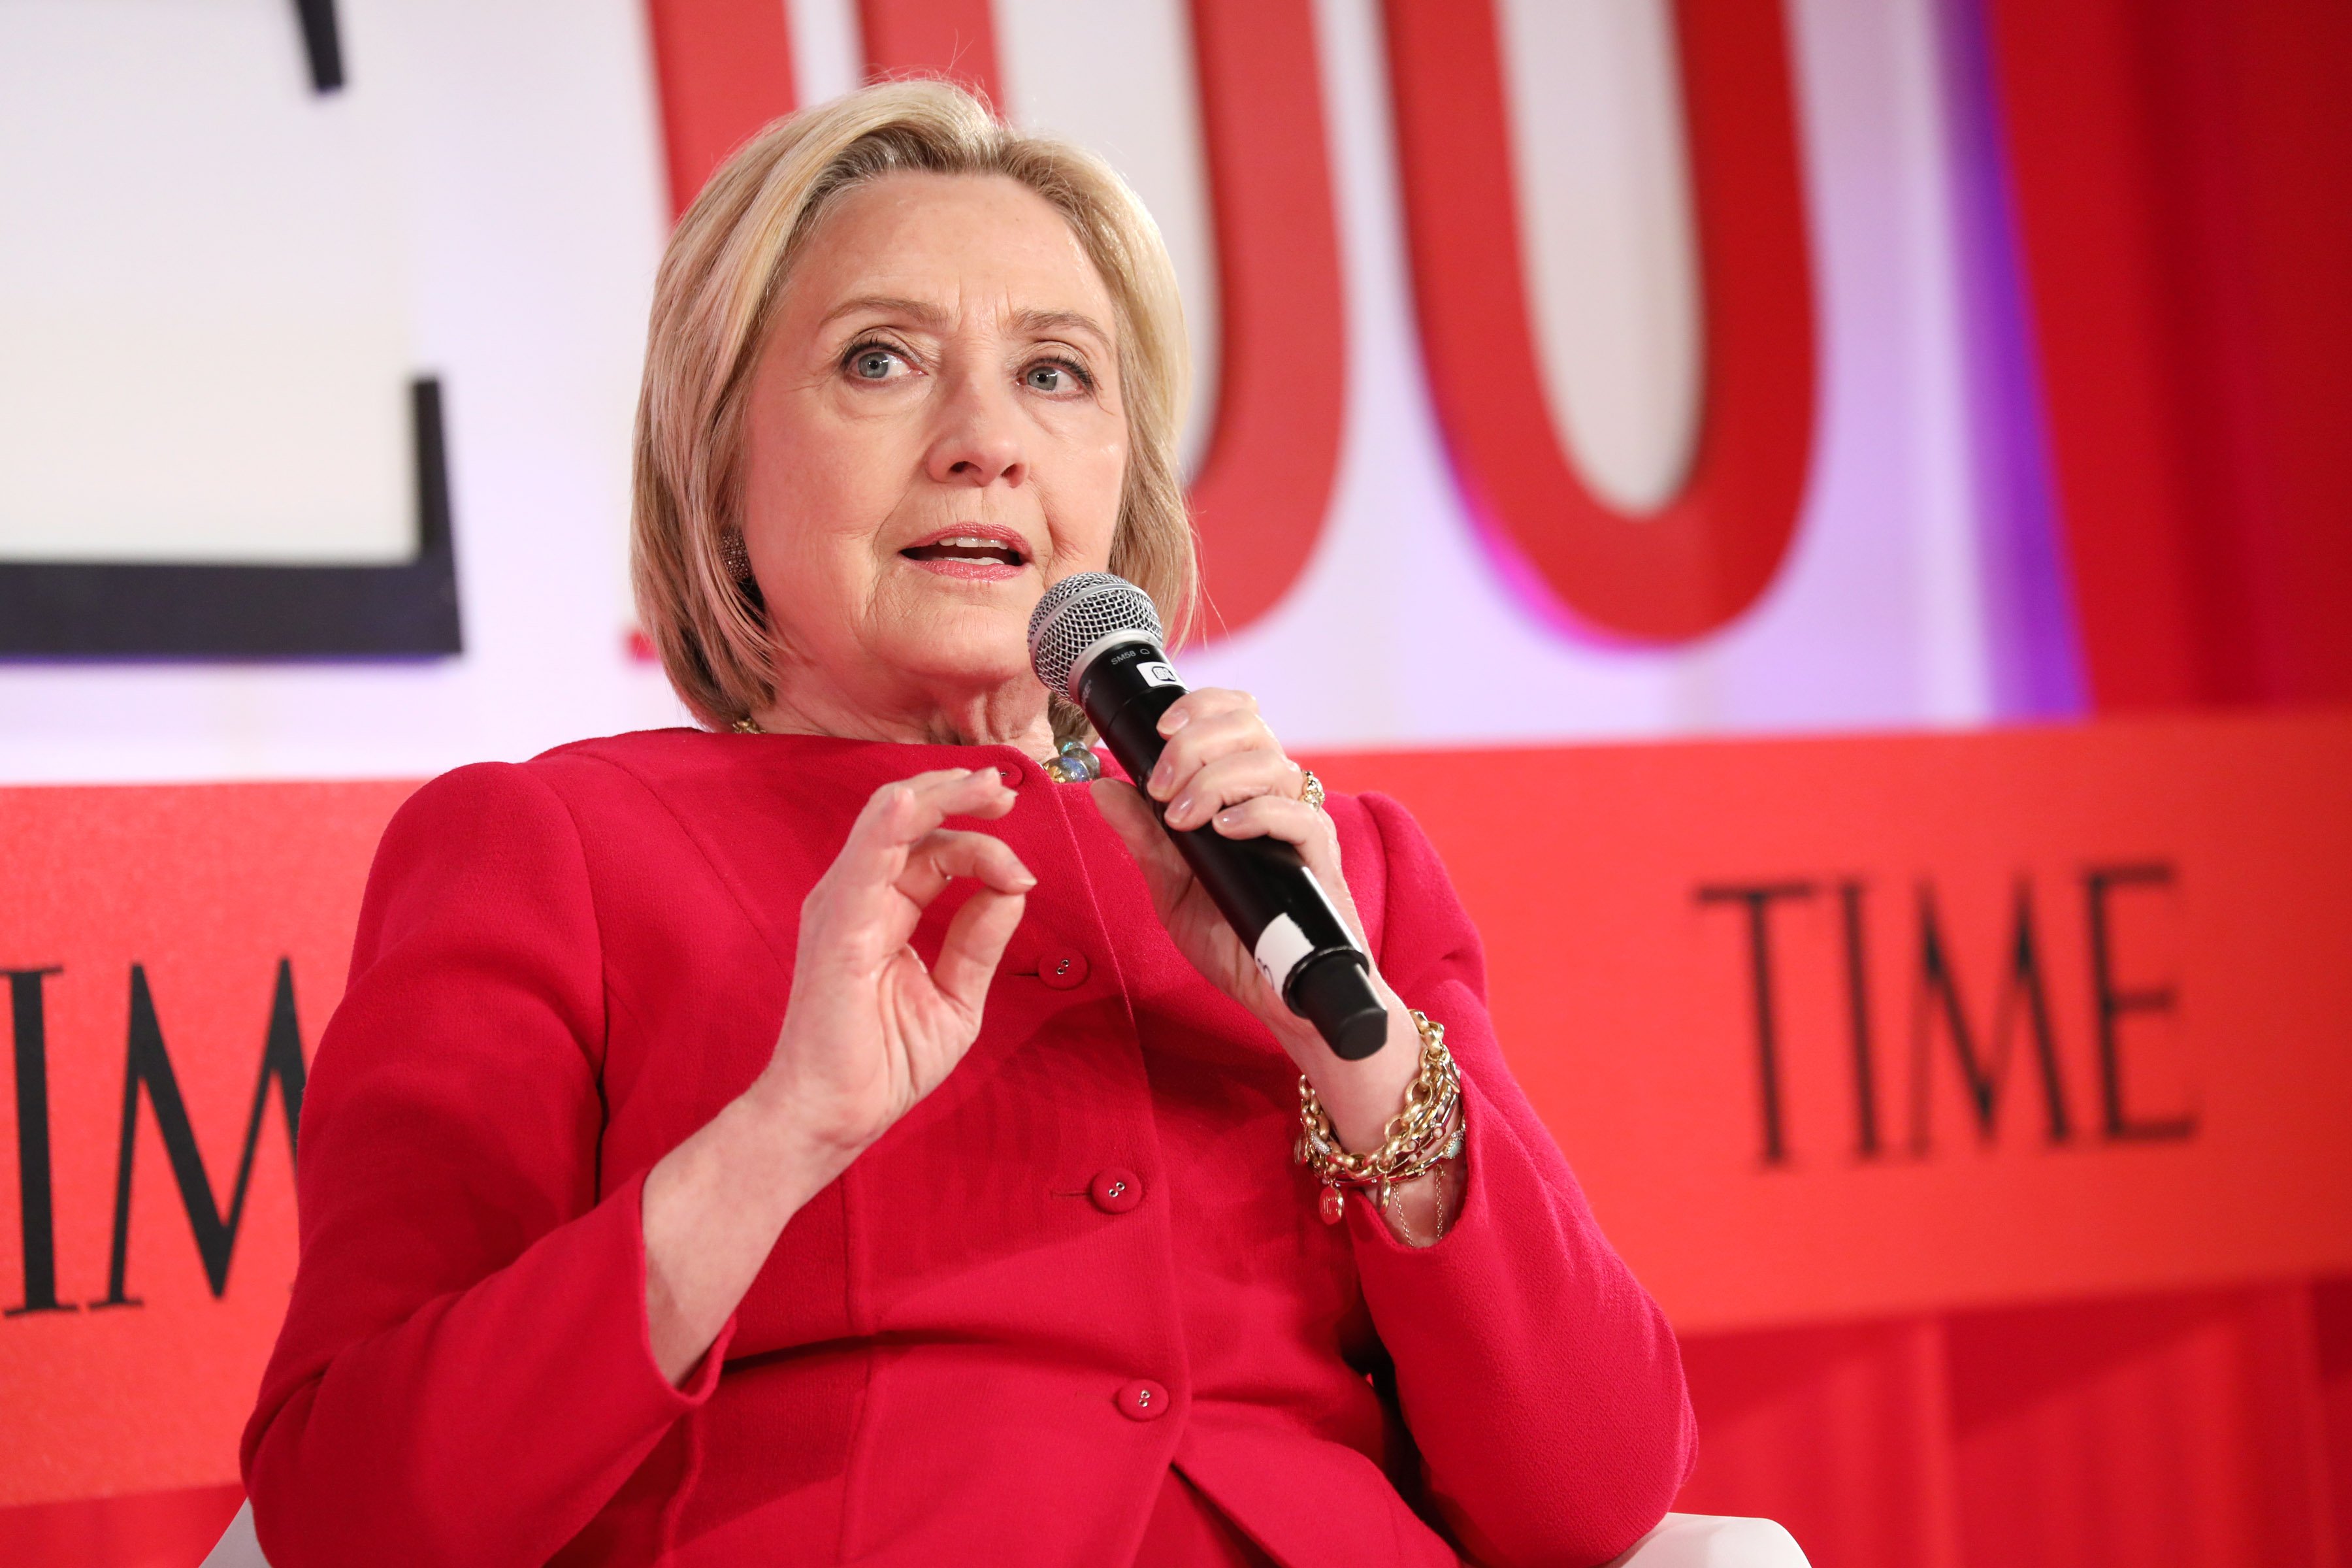 Hillary Clinton speaks at a panel discussion during the Time 100 Summit in New York City on April 23, 2019 | Photo: Getty Images